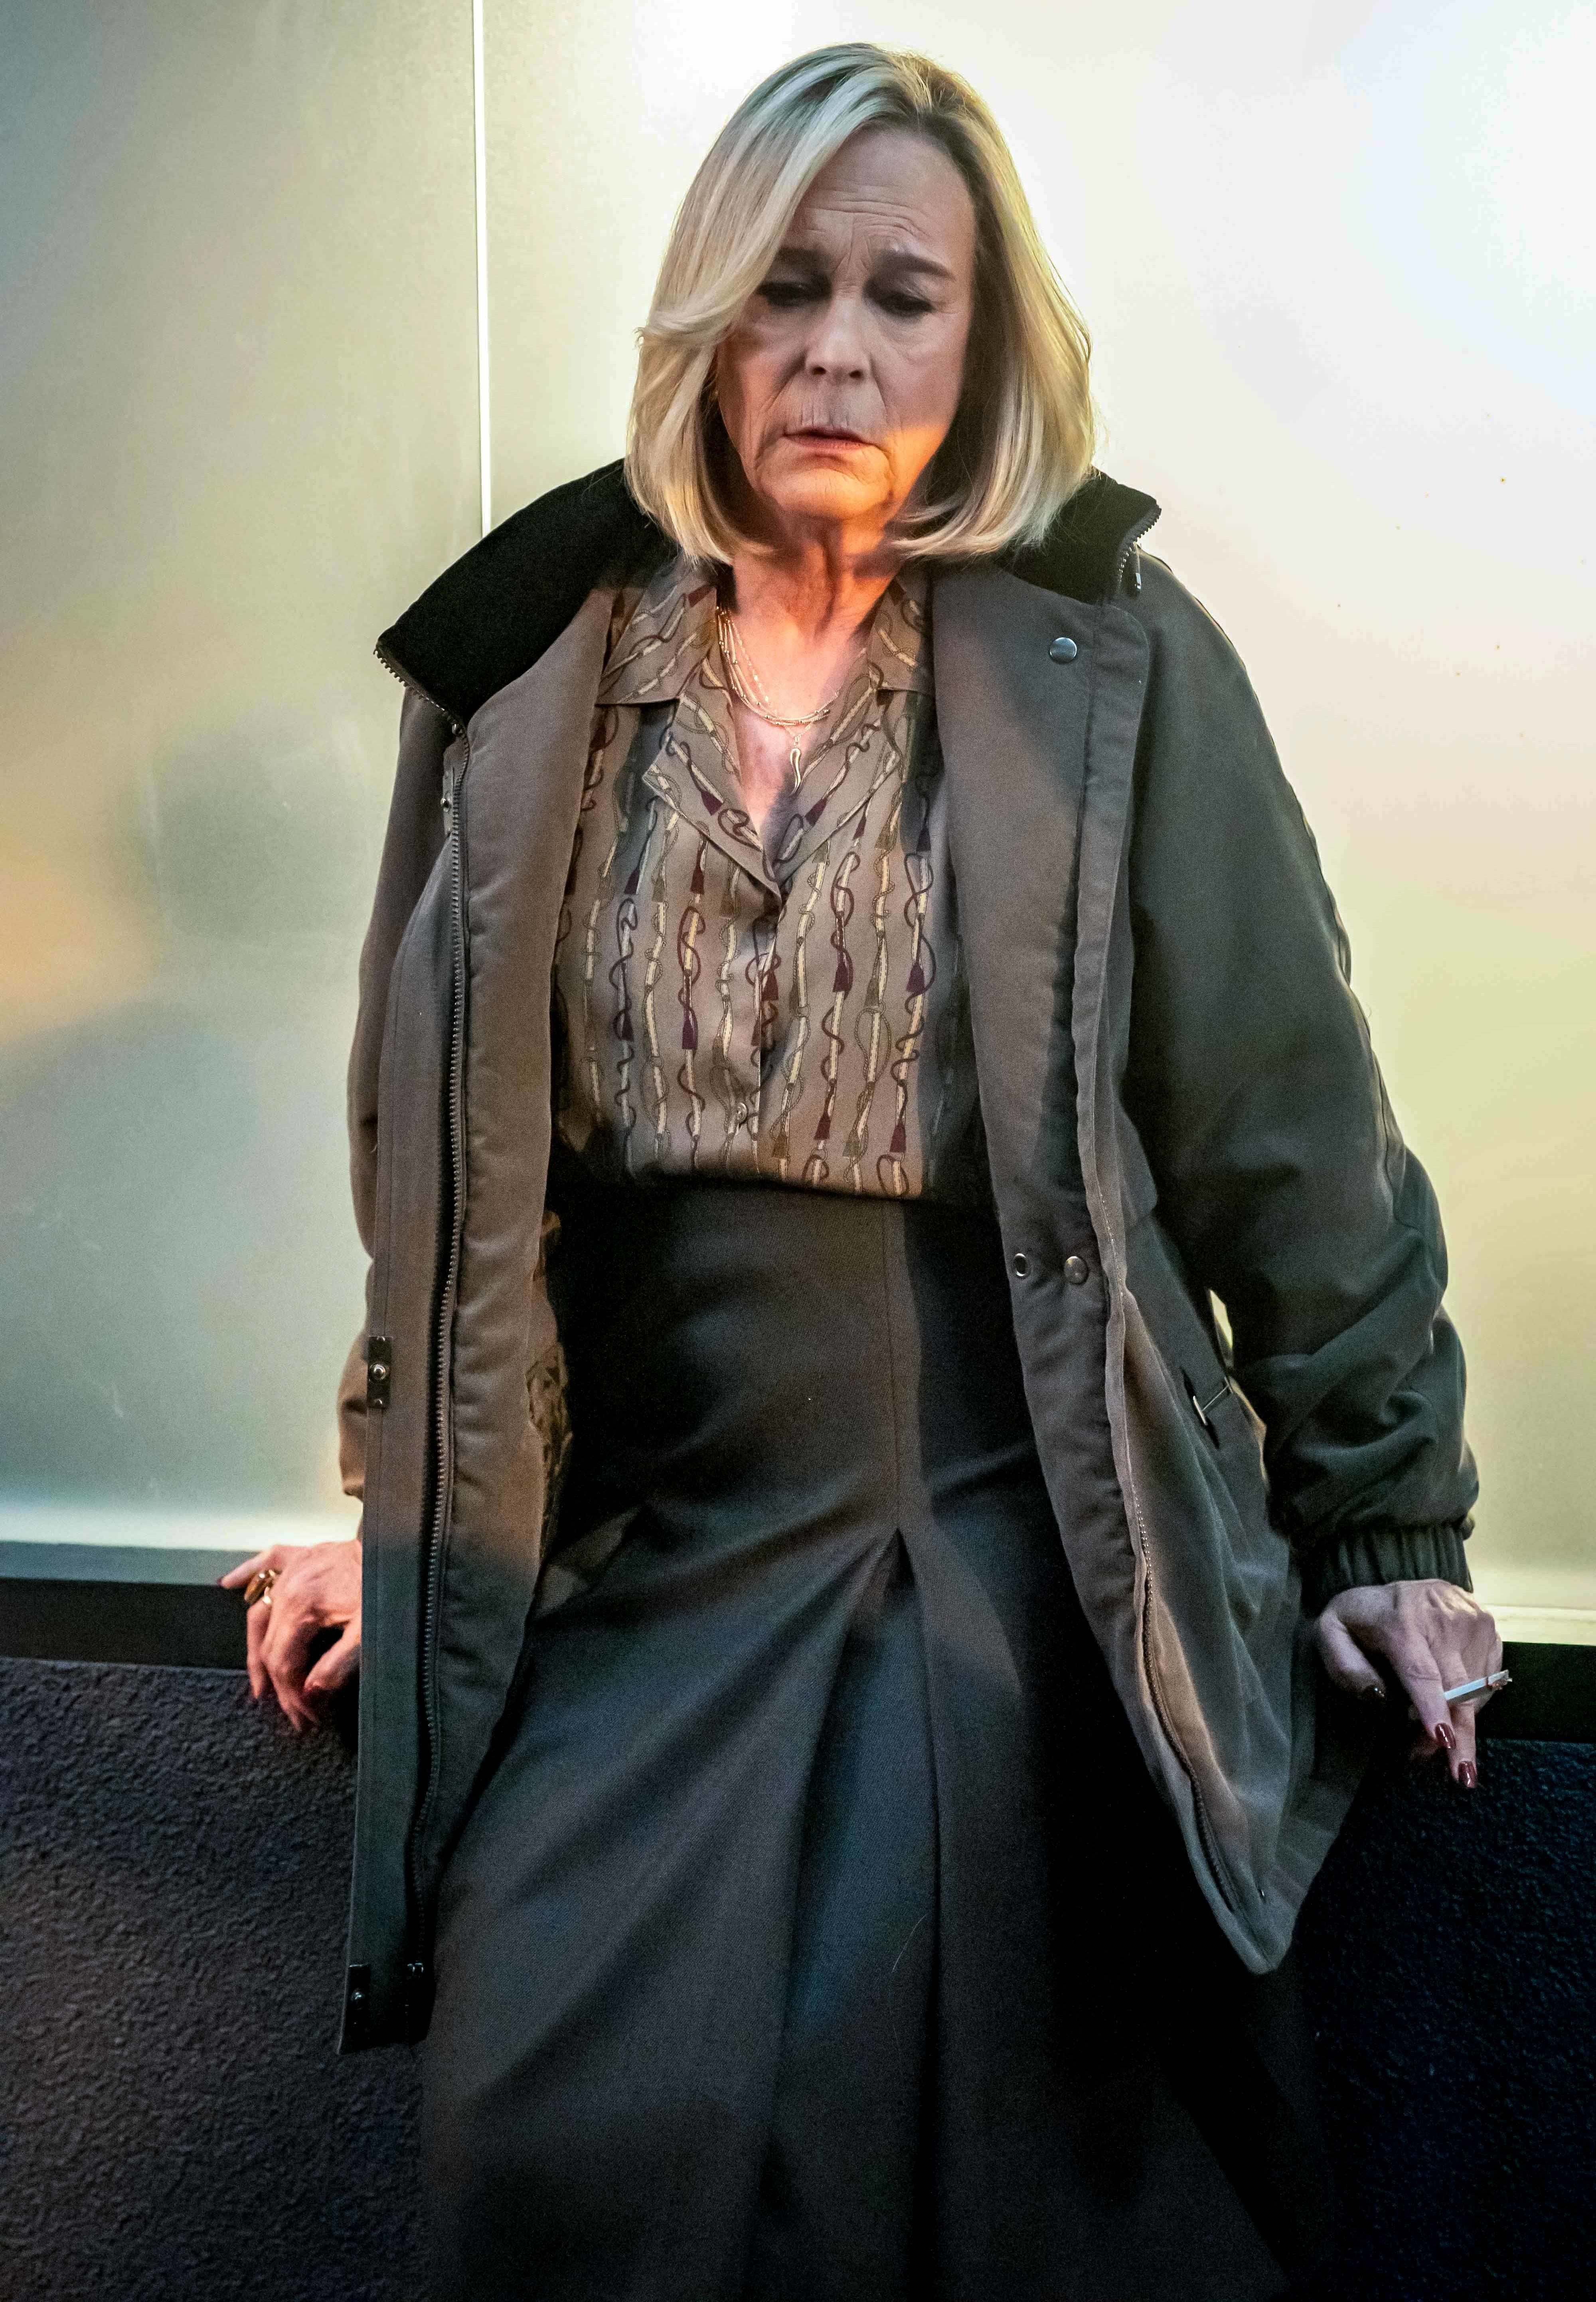 Jamie Lee Curtis looking distressed in a long coat, skirt and button-up shirt in The Bear